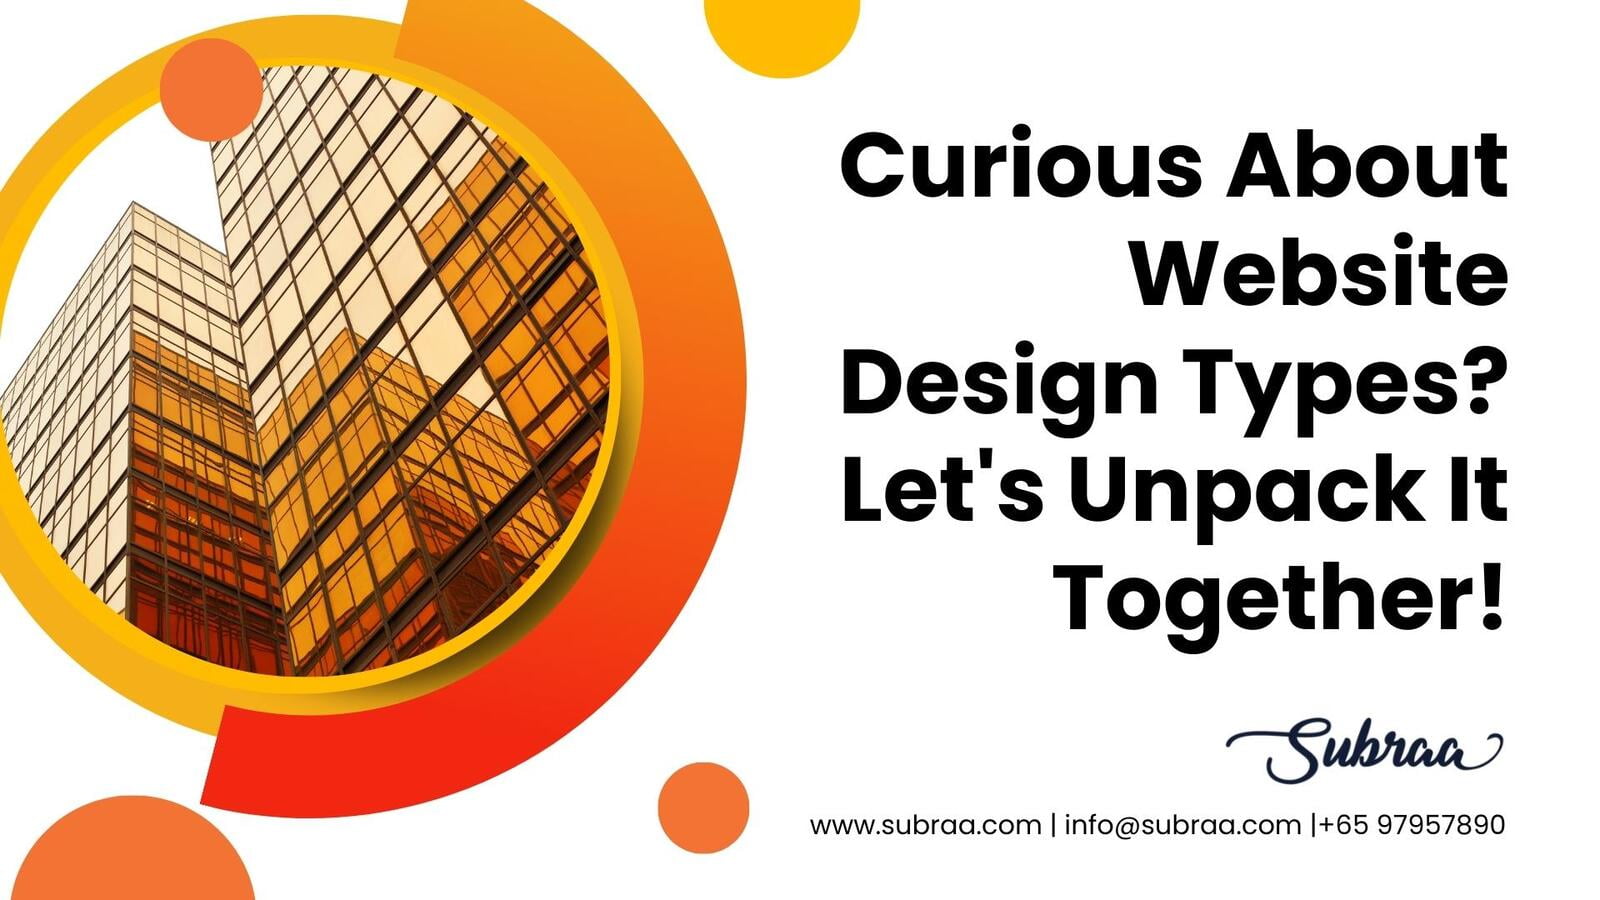 Curious About Website Design Types - Let's Unpack It Together!